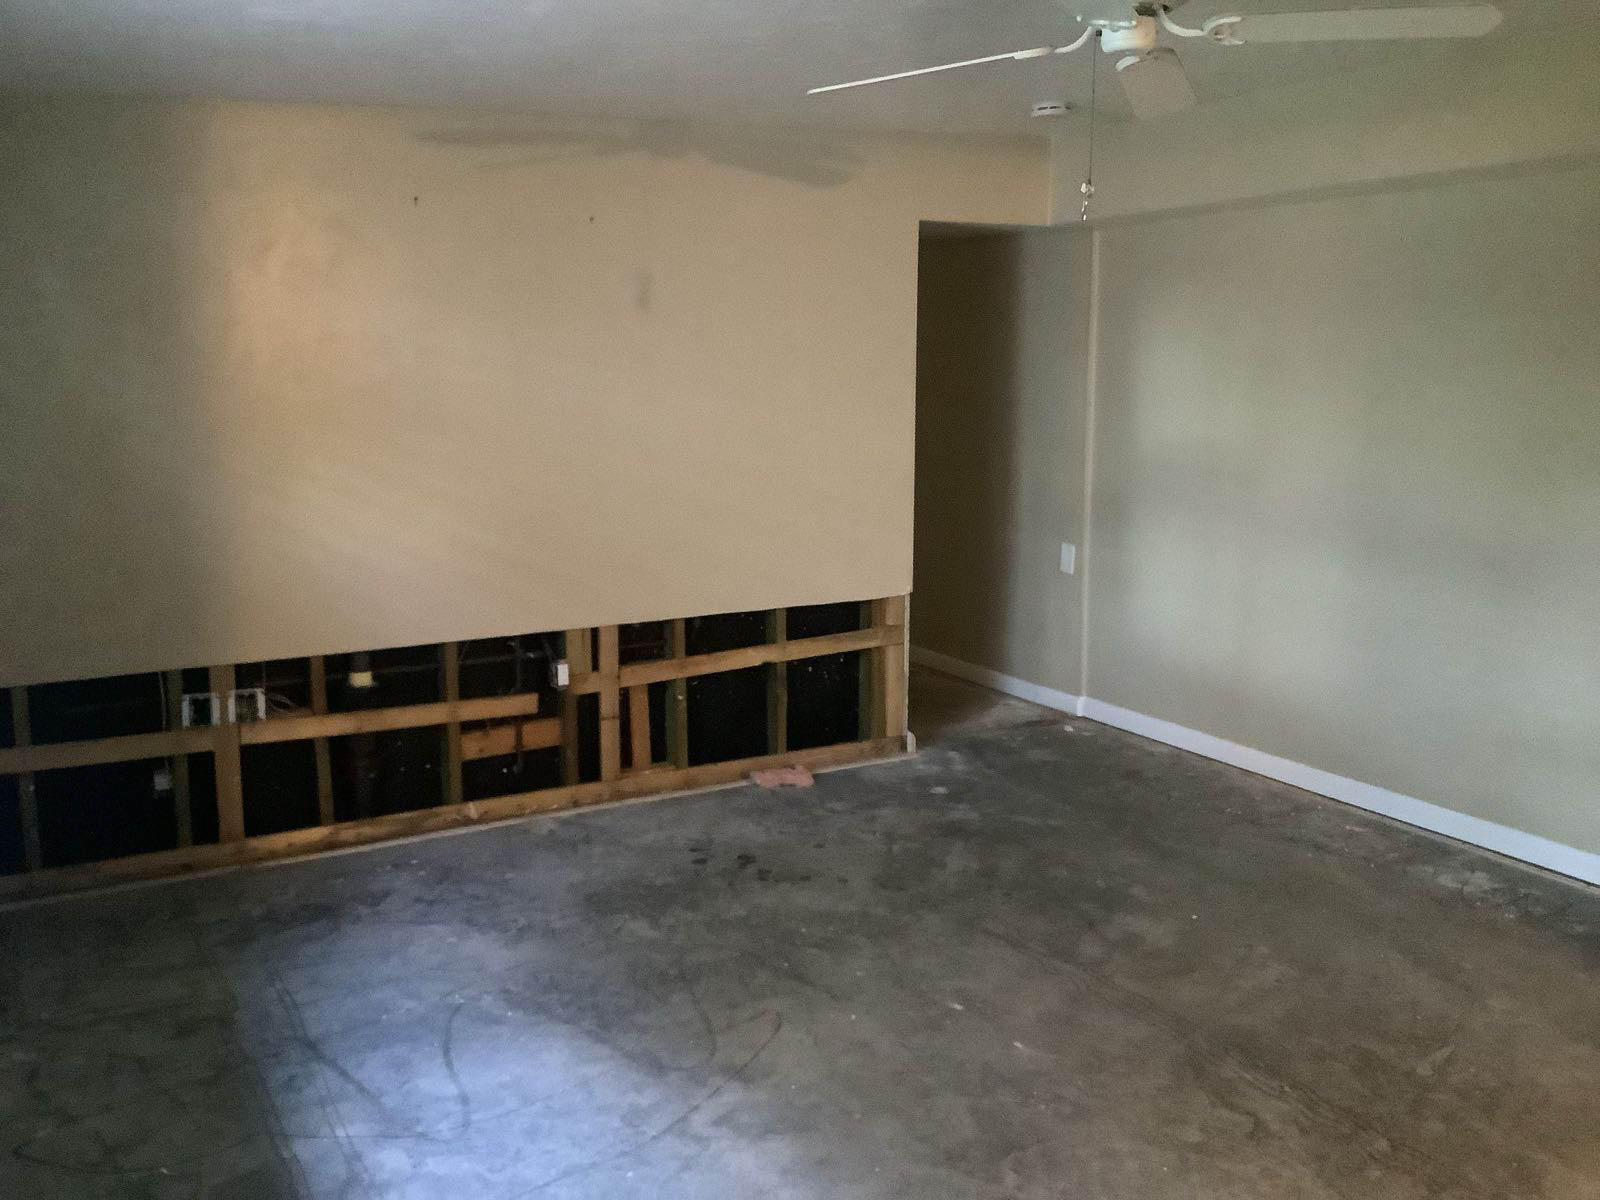 If you've had water damage or a fire, or if you've been involved in an accident that damaged your drywall, SERVPRO can help you restore your home to pre-damage condition. We'll remove the drywall and clean up the area so that it's safe for you and your family to return home.